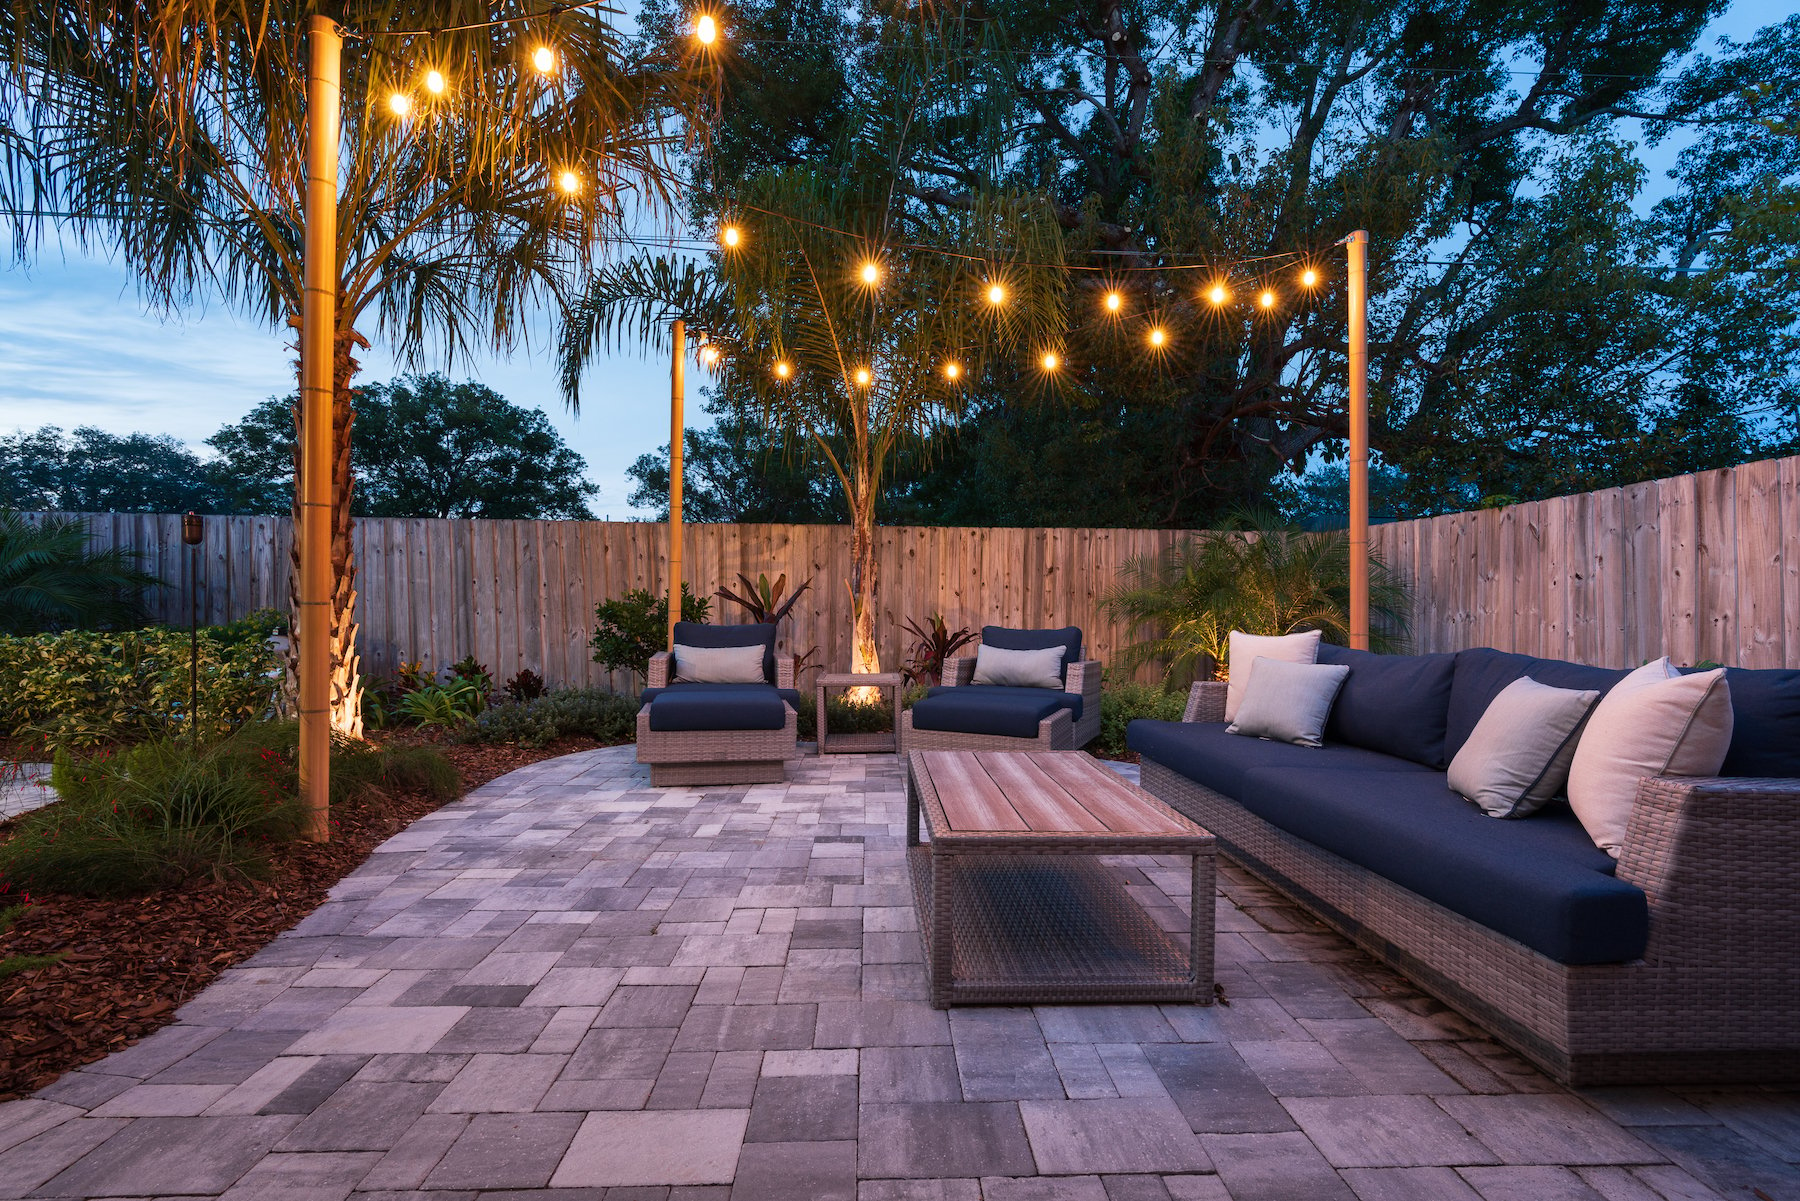 Paver patio with outdoor lighting